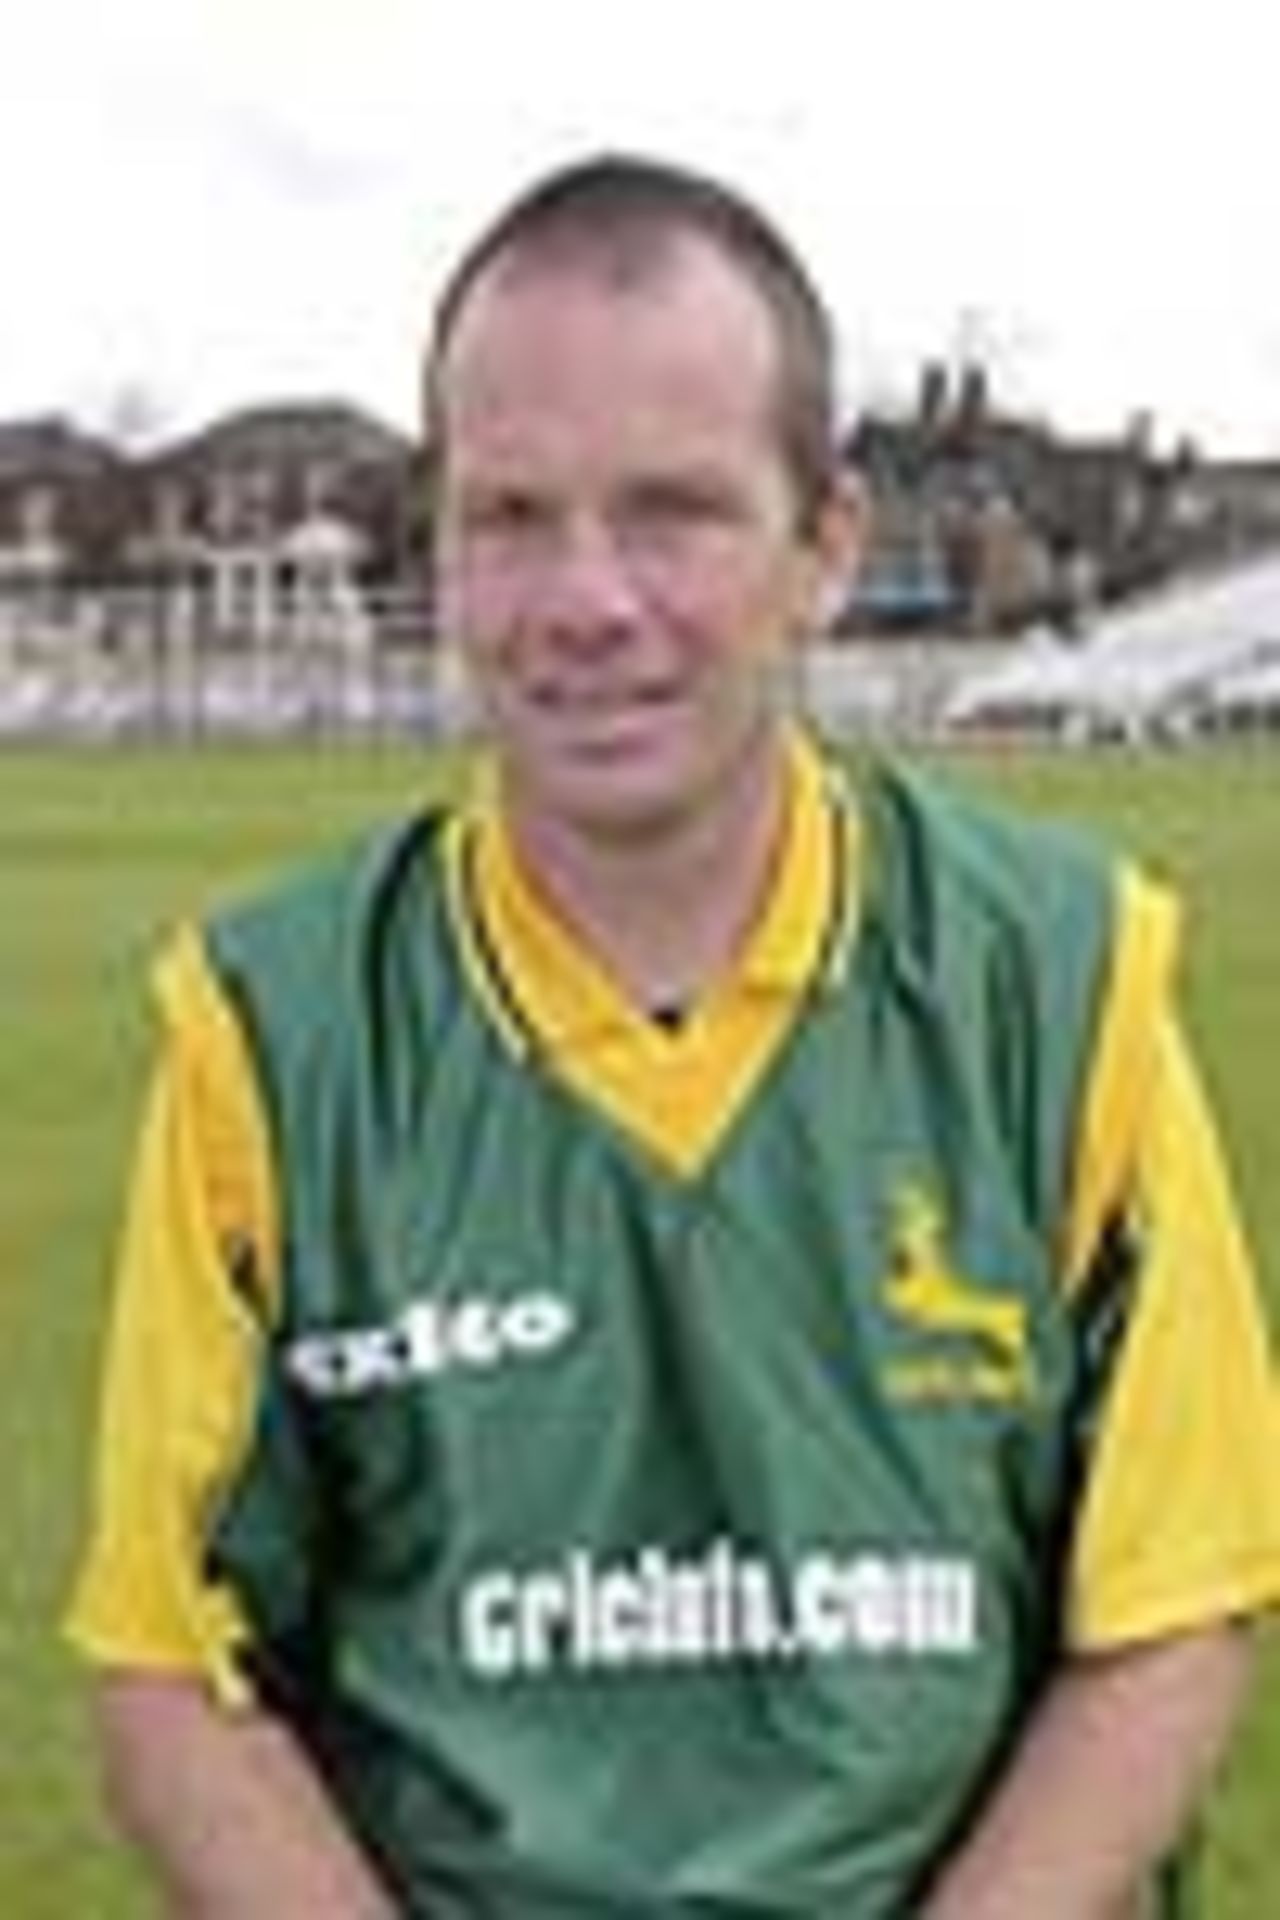 Taken at the Notts CCC photocall April 2001